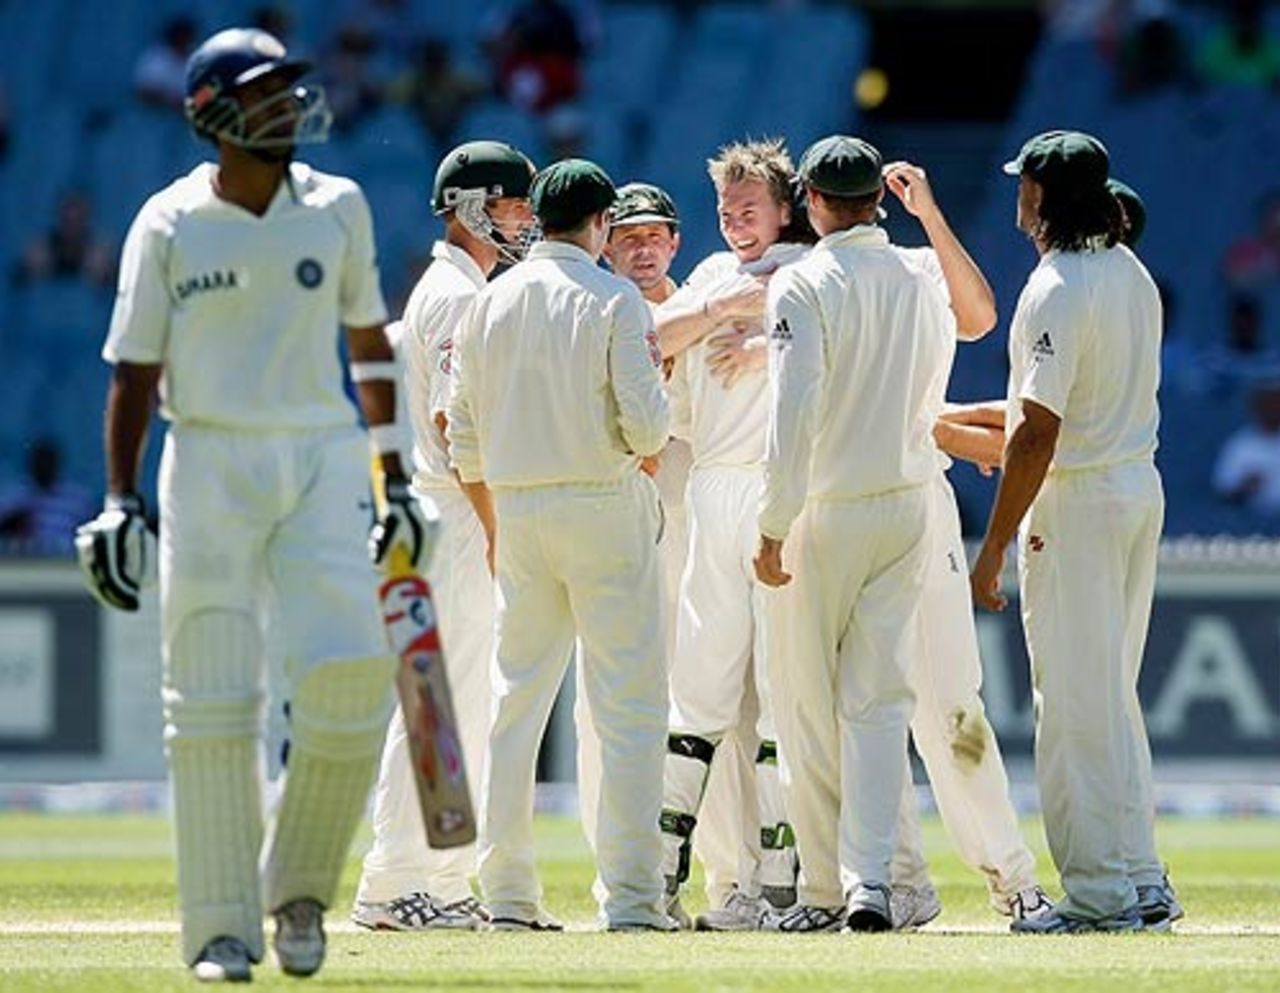 Brett Lee is congratulated on removing Wasim Jaffer, Australia v India, 1st Test, Melbourne, 4th day, December 29, 2007